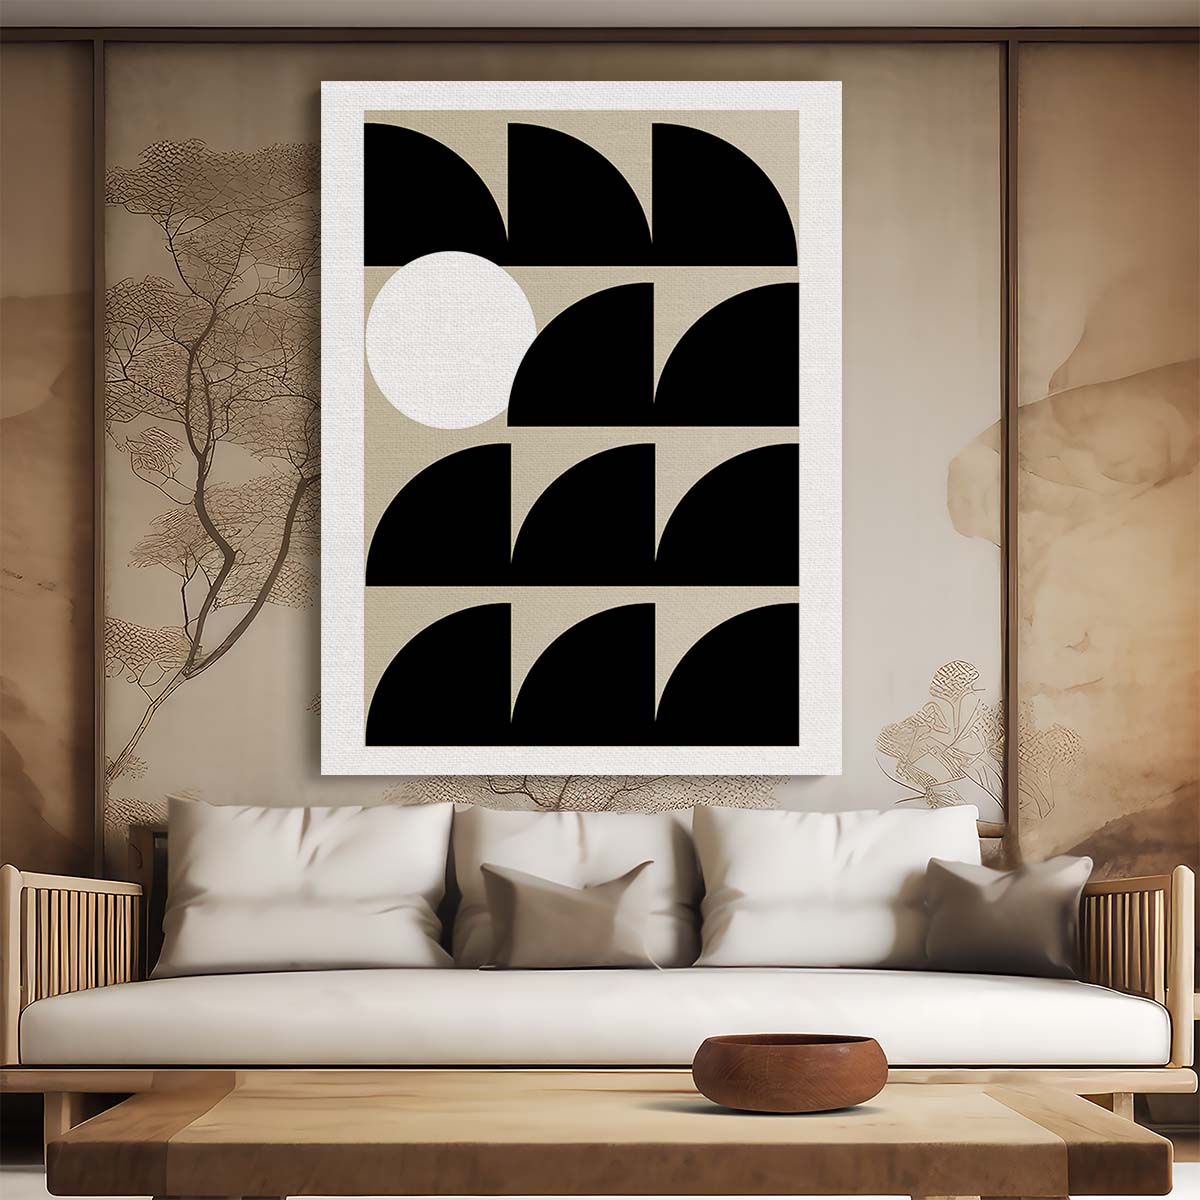 Frances Collett Abstract Circle Wave Surfing Illustration Wall Art by Luxuriance Designs, made in USA